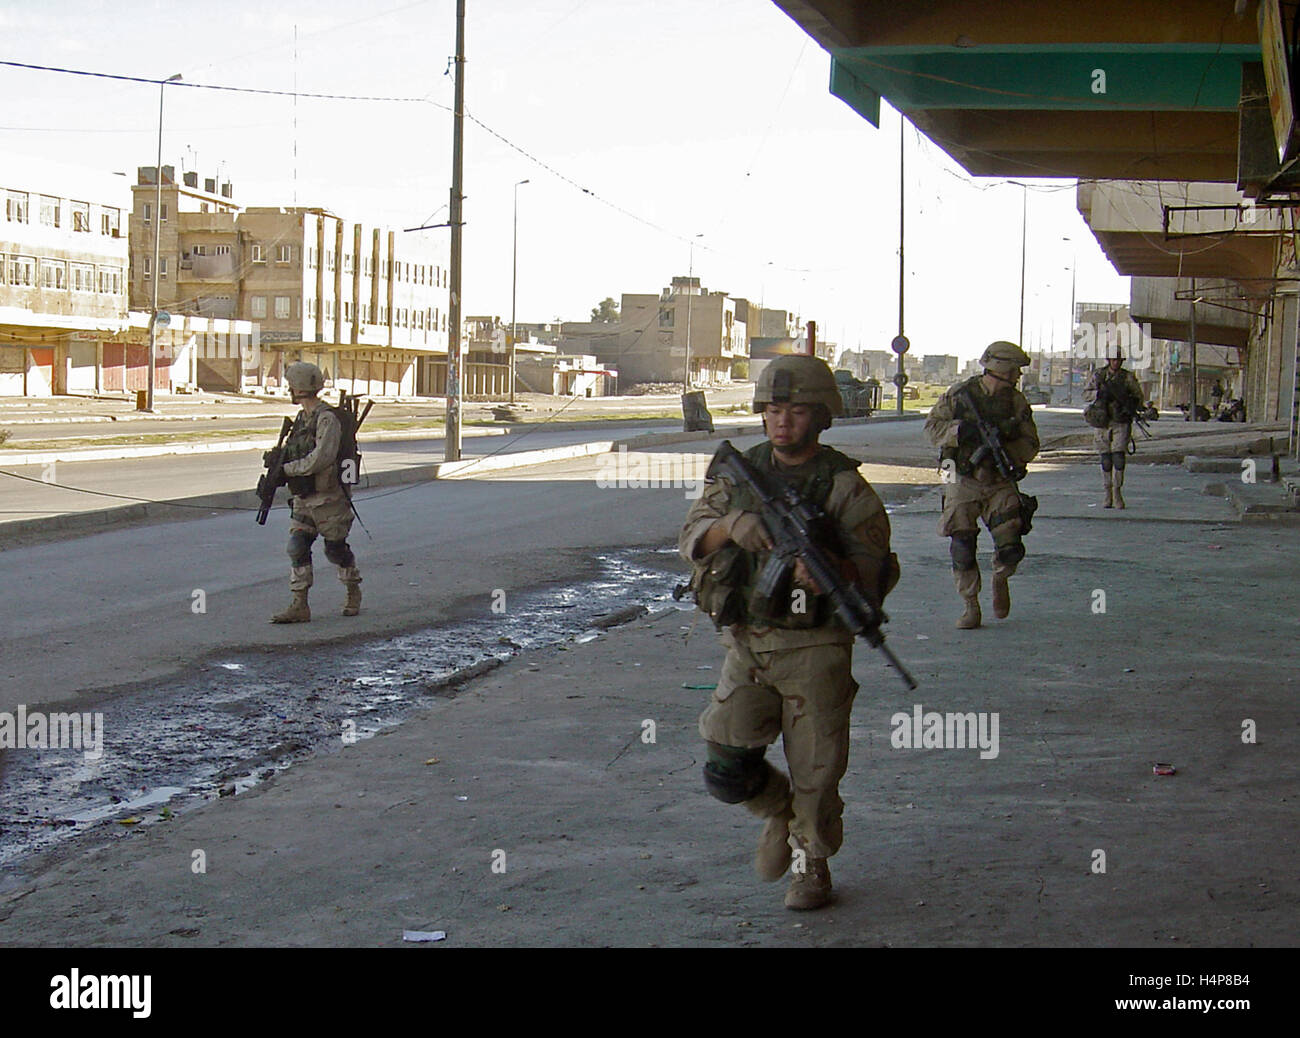 3rd December 2004 U.S. Army soldiers of the 1st Battalion, 24th Infantry Regiment, 'Deuce Four', on the streets of Mosul, Iraq. Stock Photo